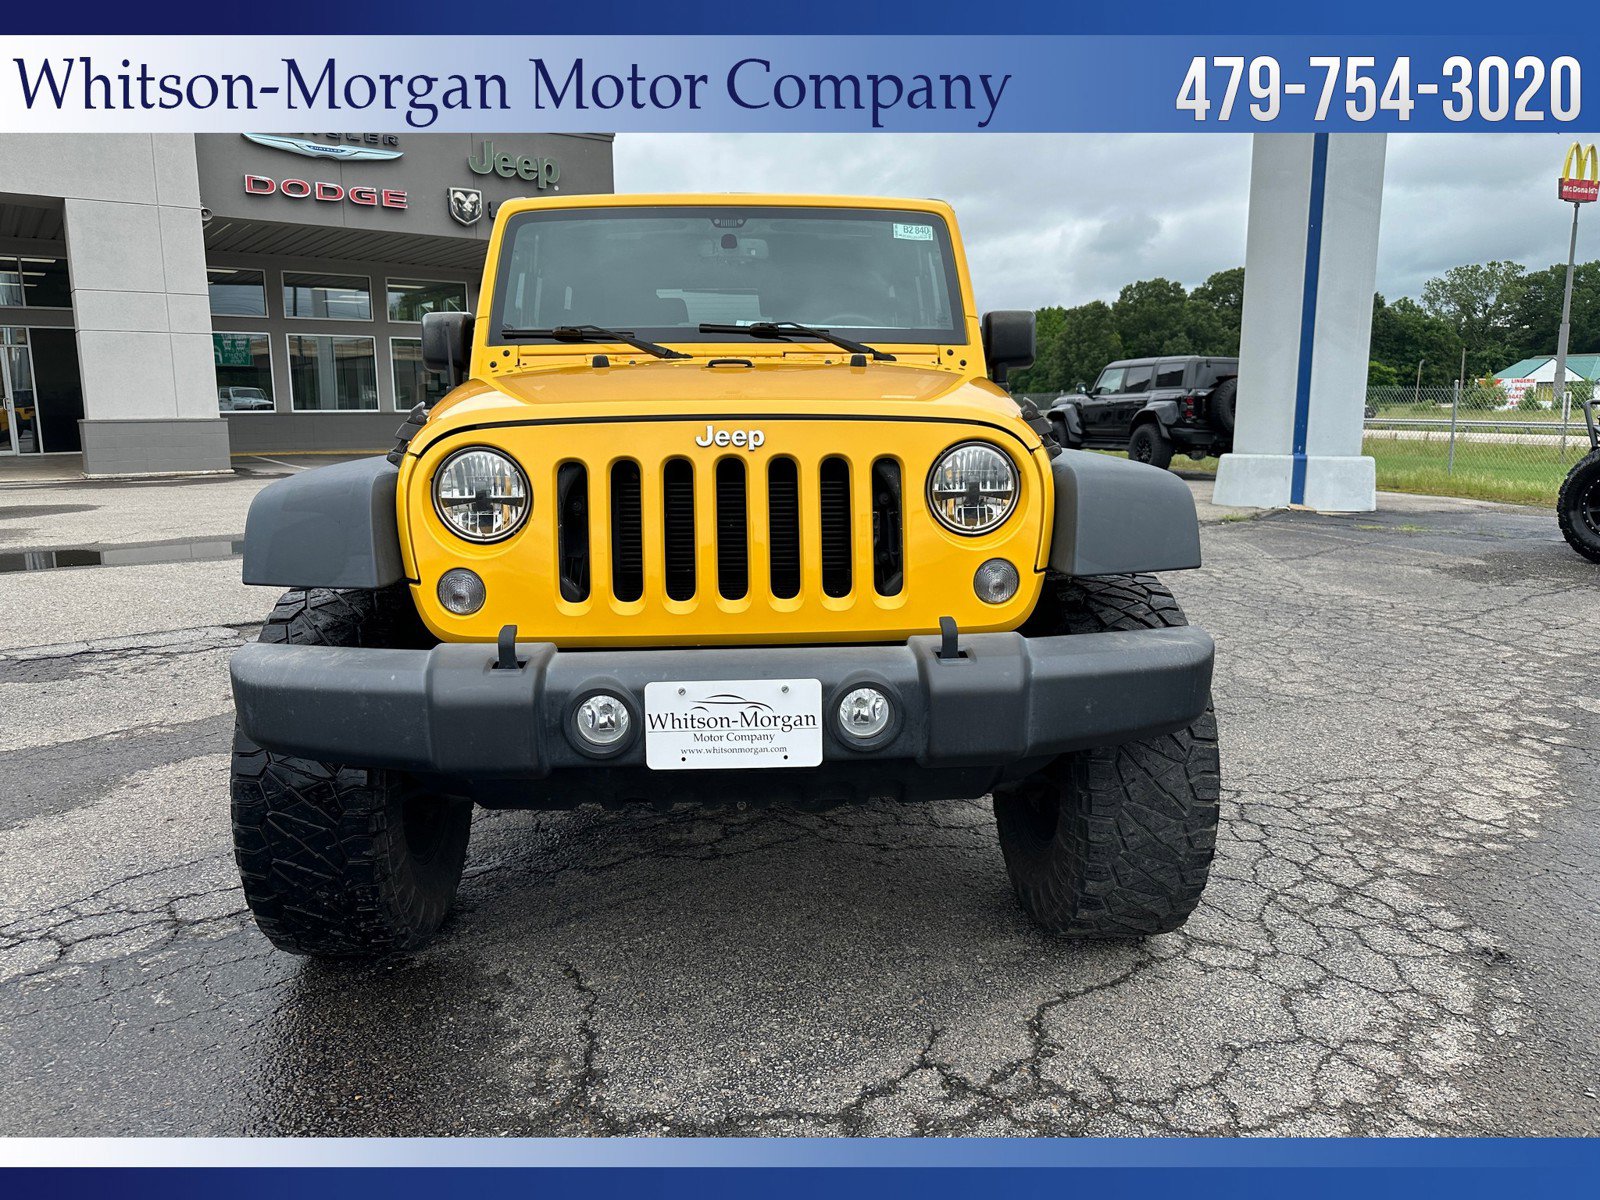 Used 2015 Jeep Wrangler Rubicon with VIN 1C4BJWCG9FL671398 for sale in St. Cloud, Minnesota